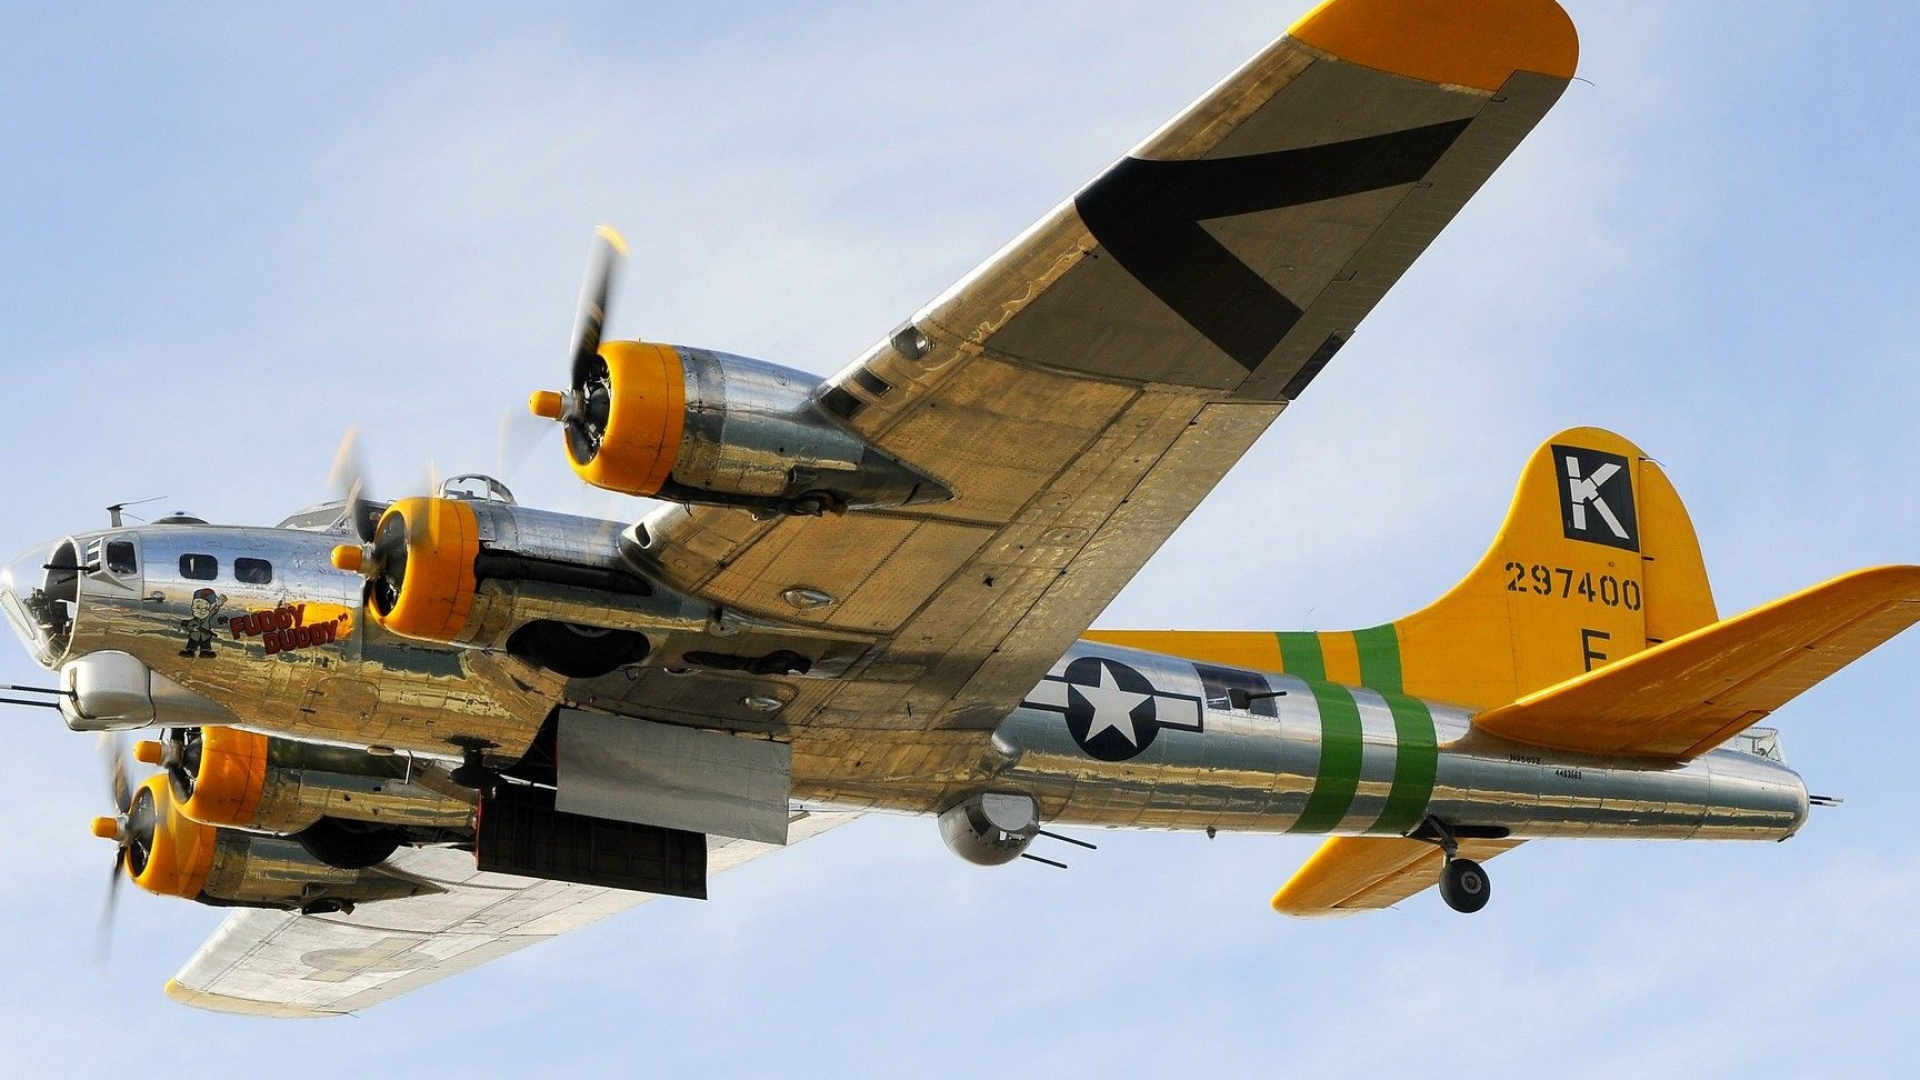 Boeing B-17 Flying Fortress wallpapers, Military, HQ Boeing B-17 Flying Fortress pictures | 4K Wallpapers 2019 1920x1080